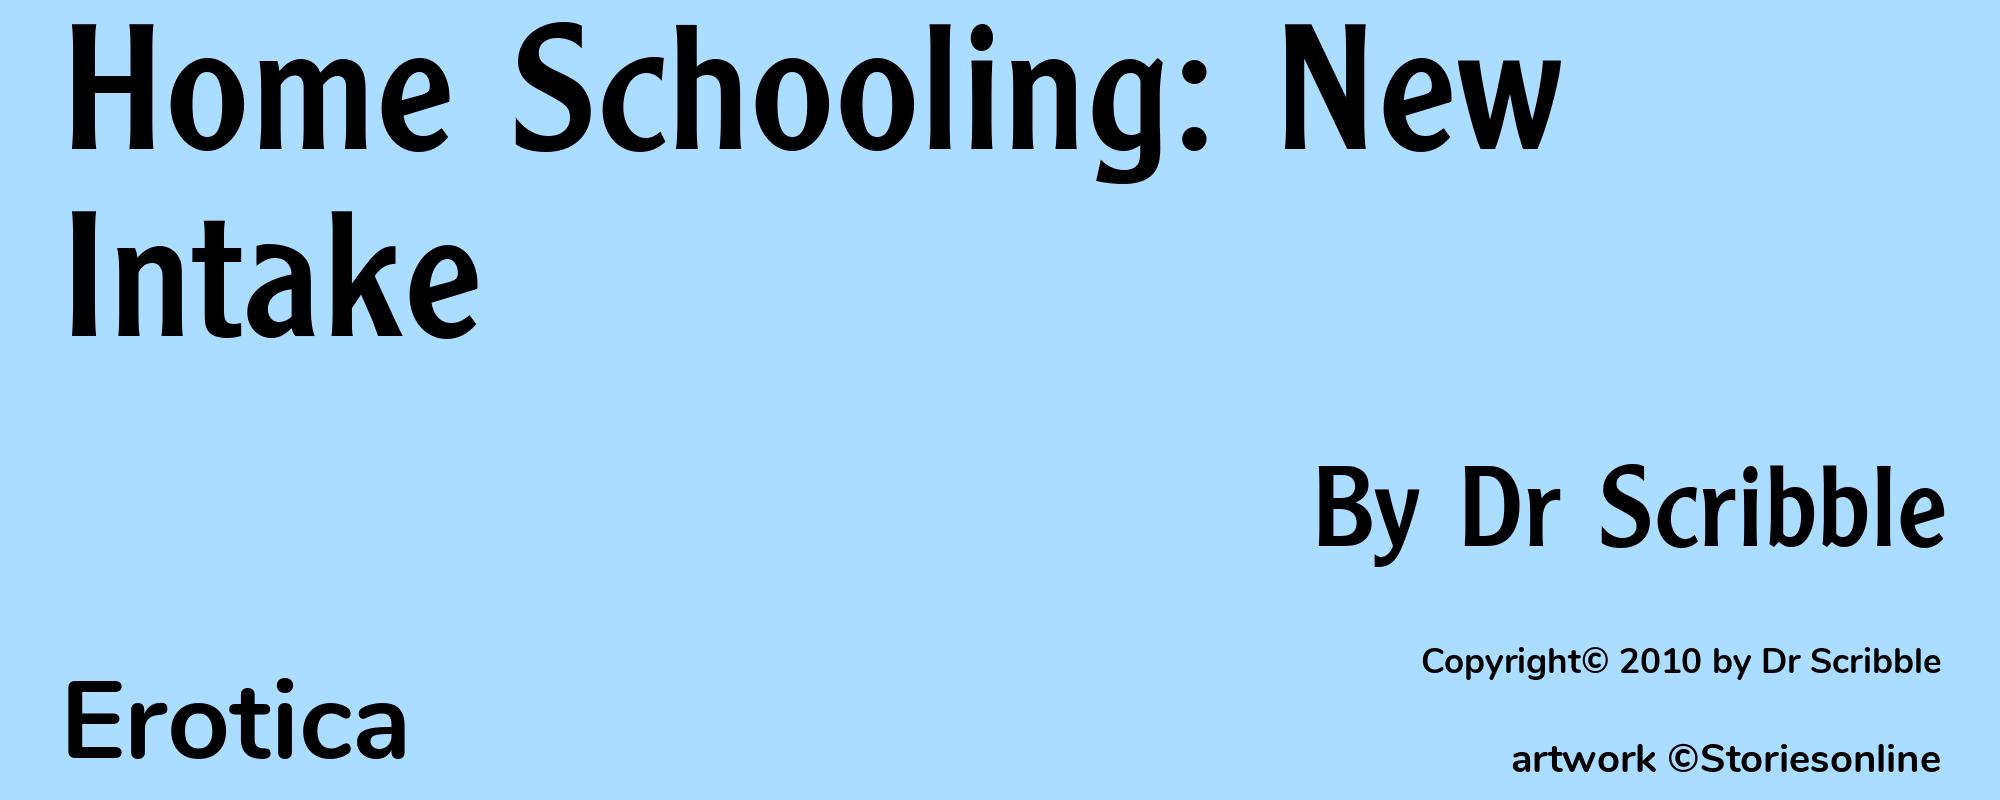 Home Schooling: New Intake - Cover